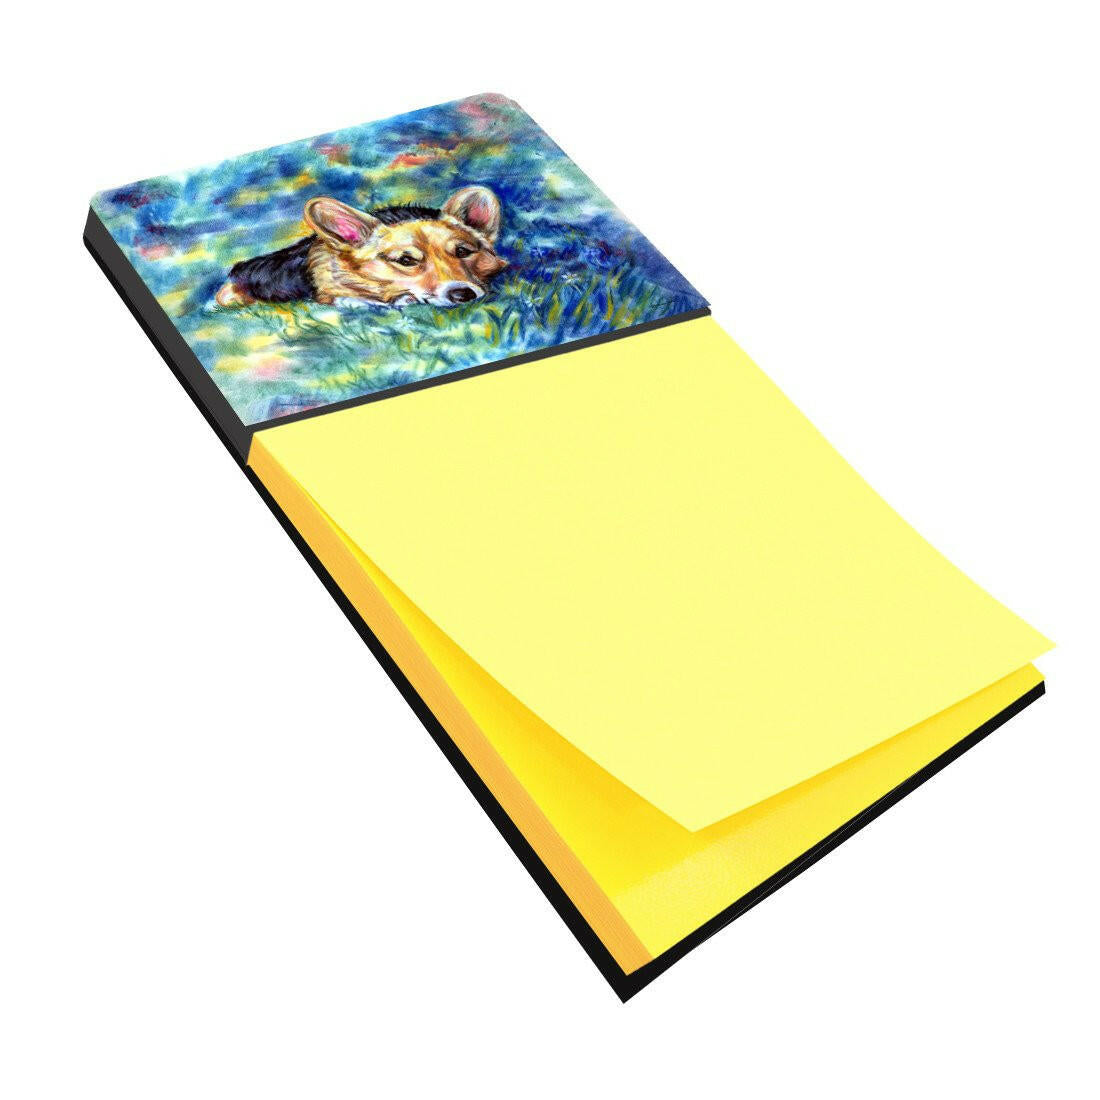 Corgi Tuckered Out Sticky Note Holder 7409SN by Caroline's Treasures